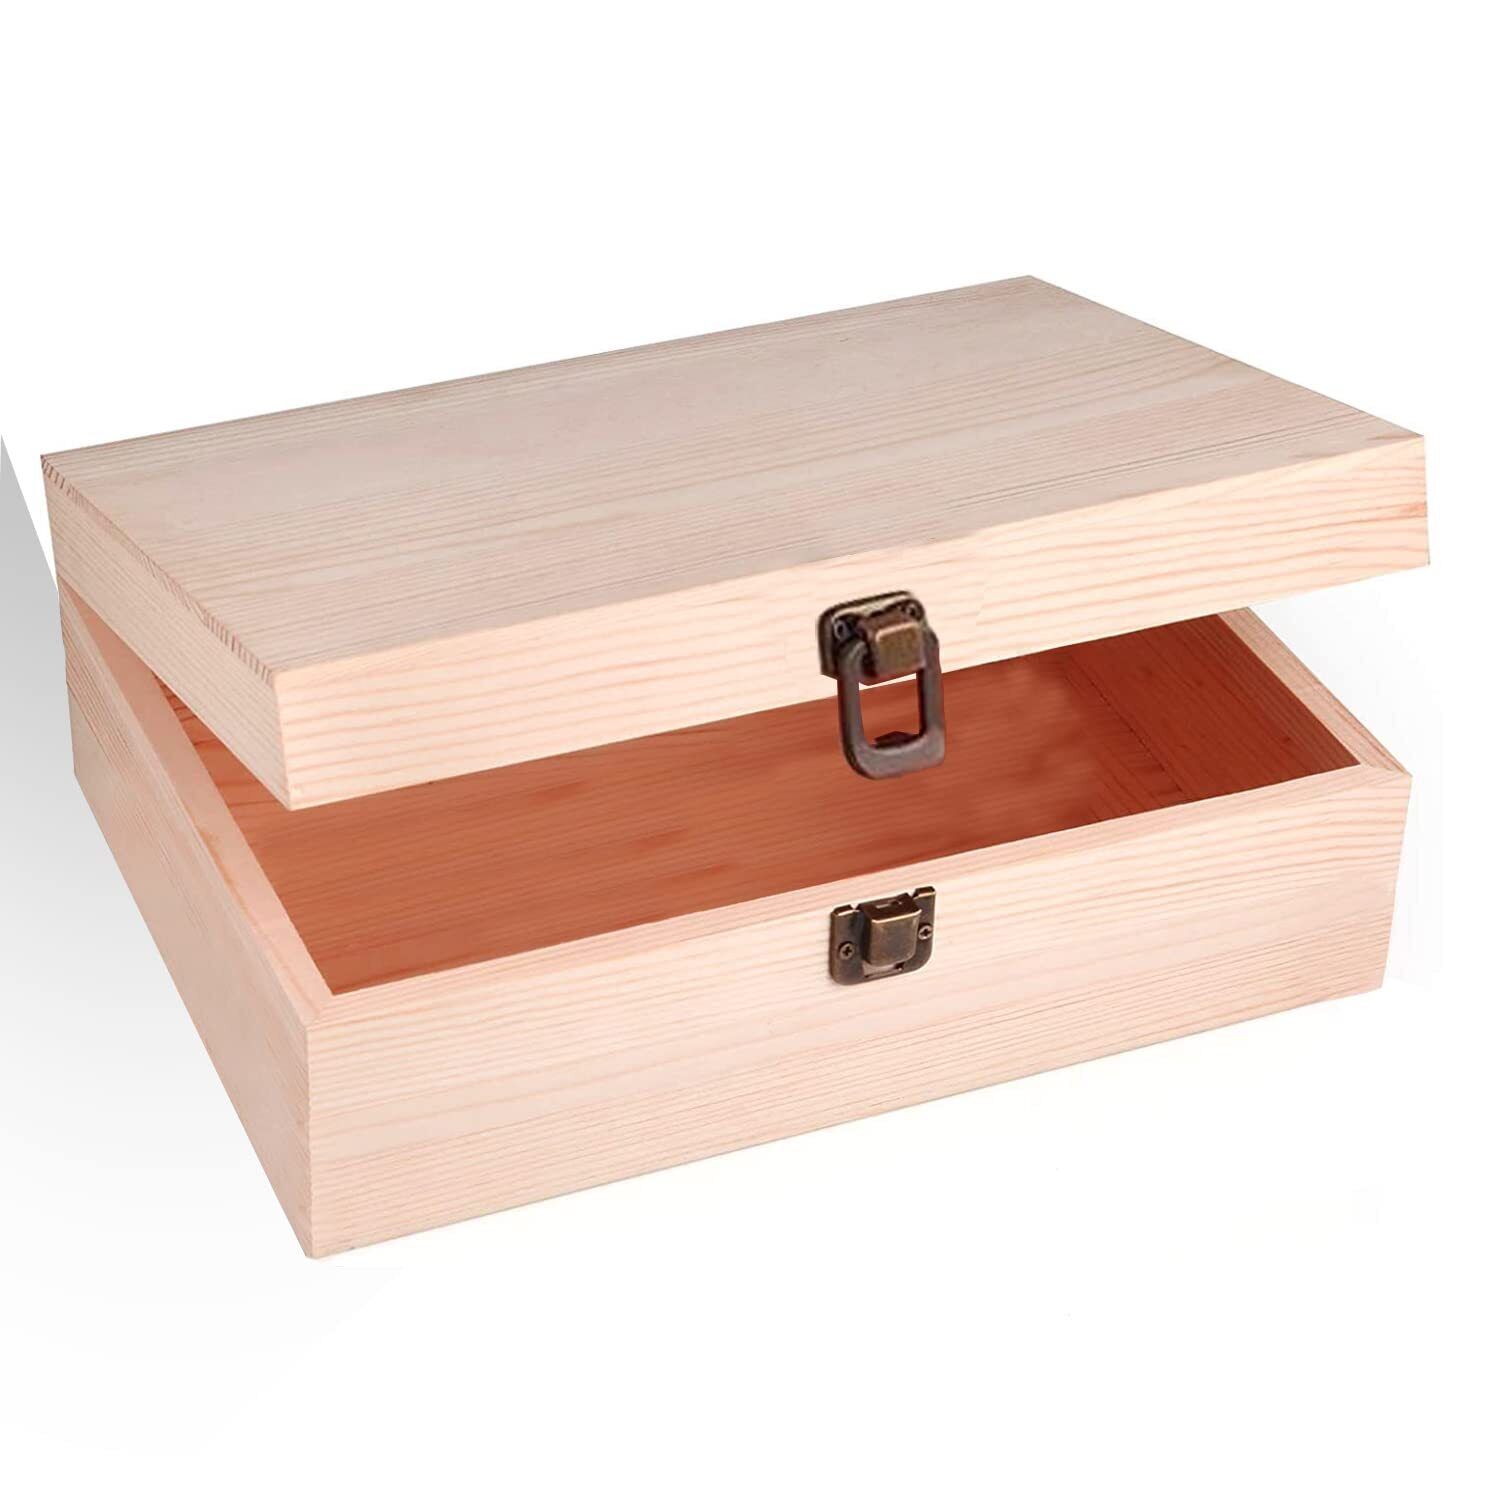 8x6x3 Inch Unfinished Wooden Box with Hinge Lid for DIY Craft Jewelry Gifts